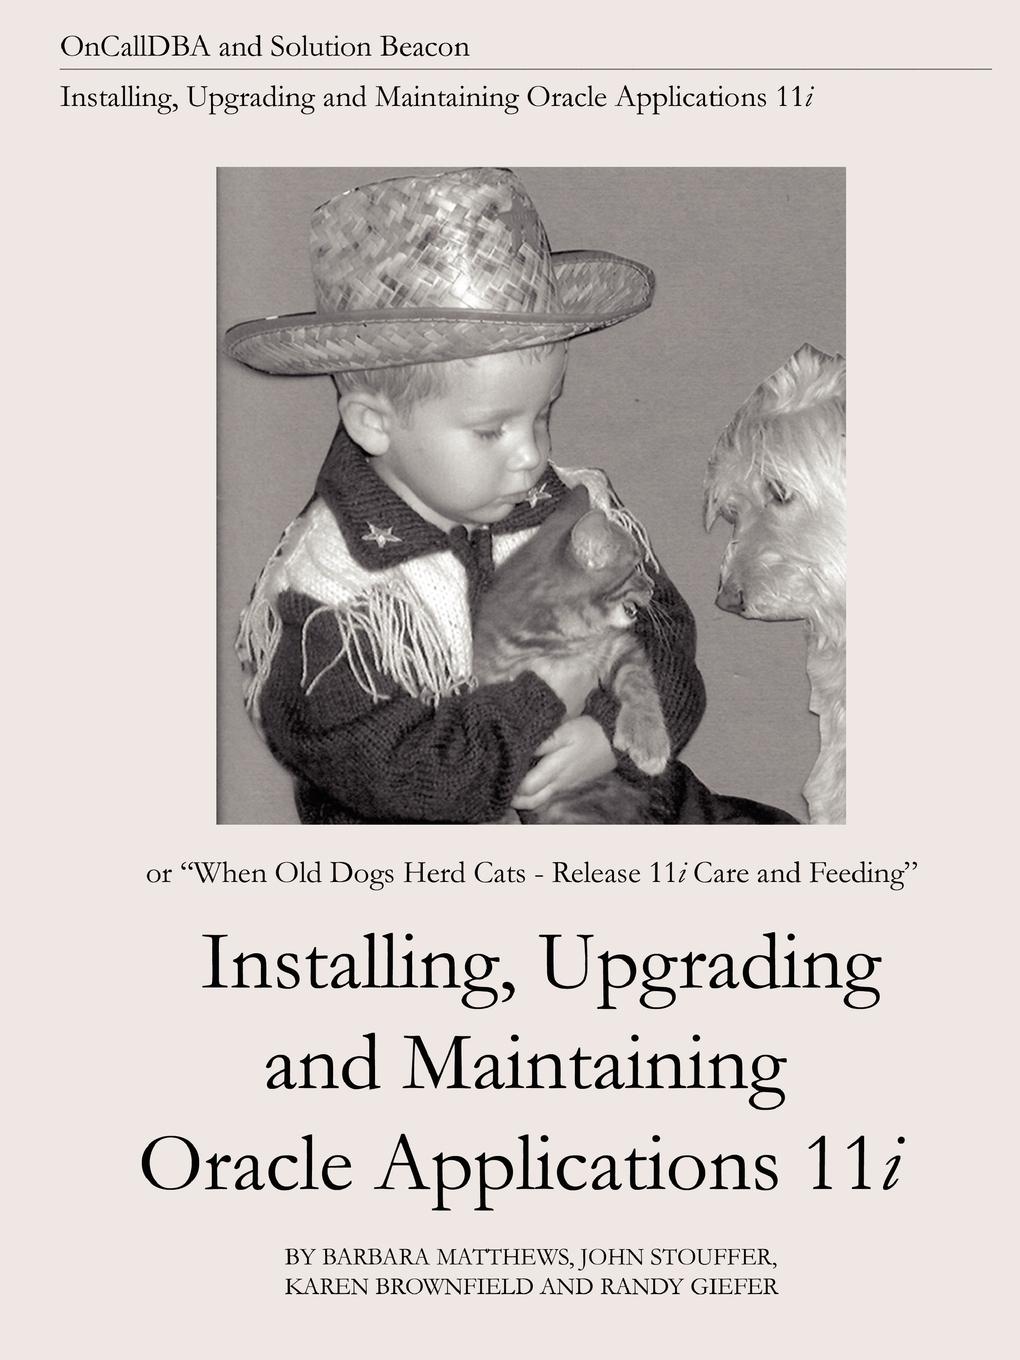 Installing, Upgrading and Maintaining Oracle Applications 11i (Or, When Old Dogs Herd Cats - Release 11i Care and Feeding) - Matthews, Barbara|Stouffer, John|Brownfield, Karen